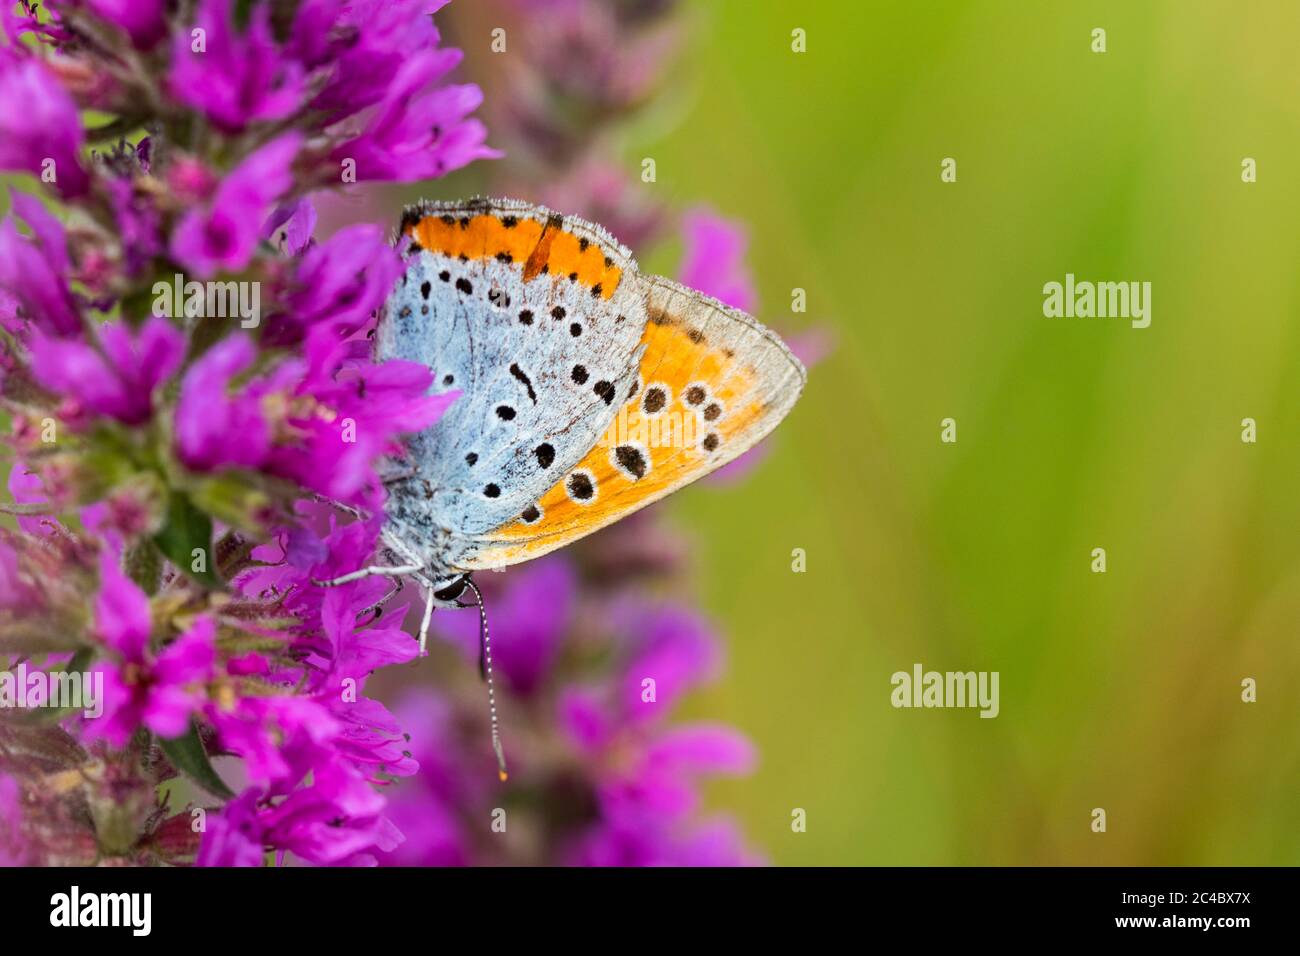 Batavus High Resolution Stock Photography and Images - Alamy